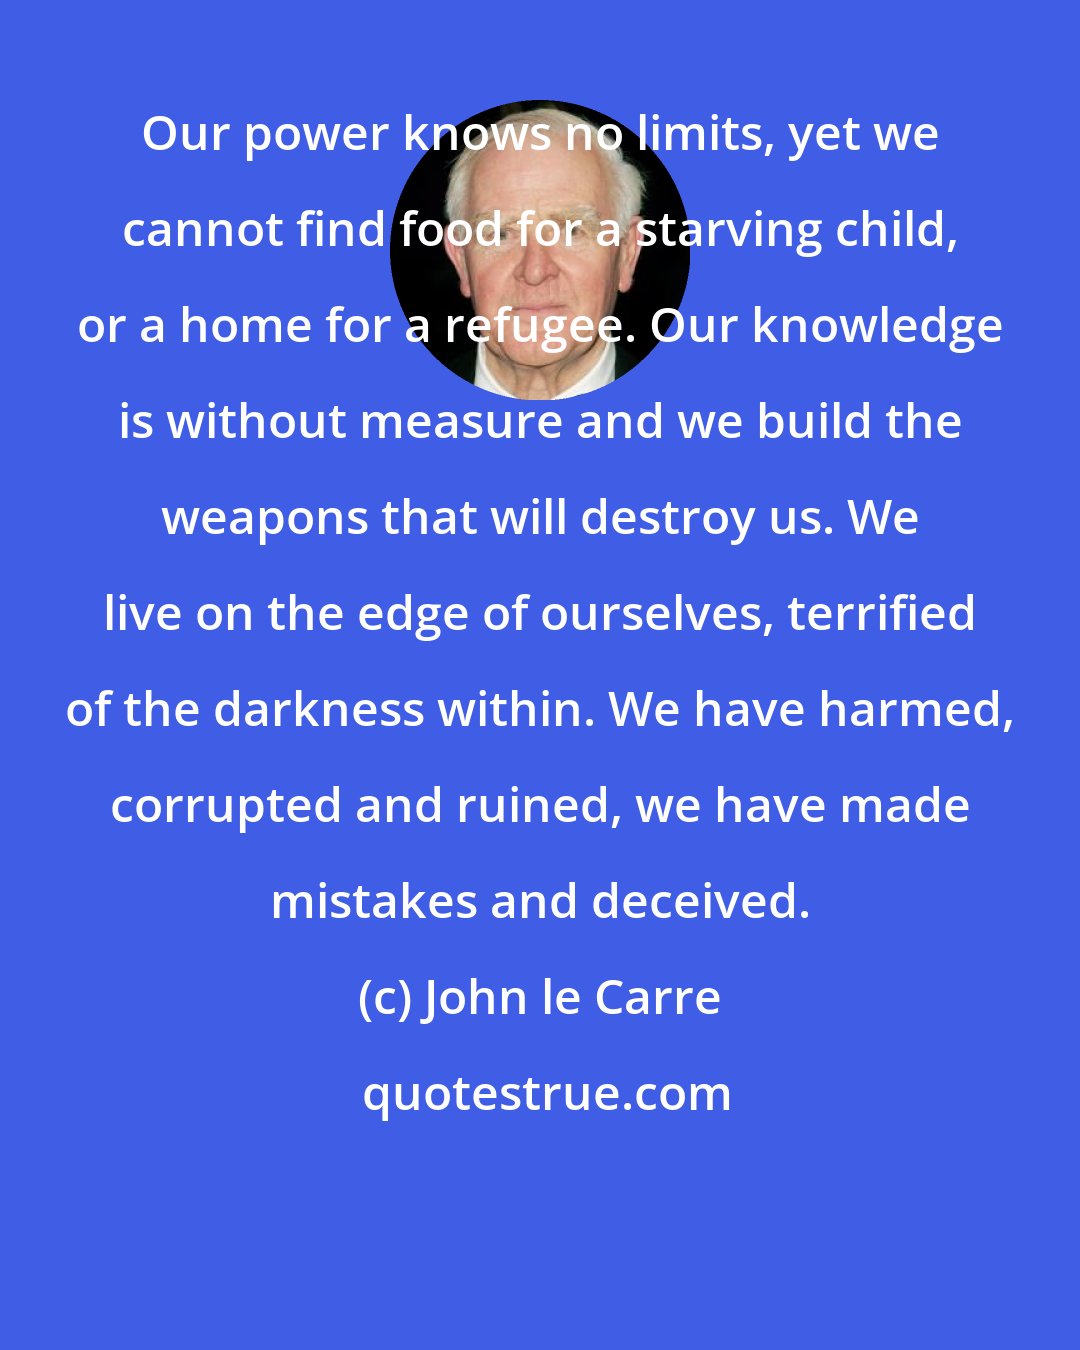 John le Carre: Our power knows no limits, yet we cannot find food for a starving child, or a home for a refugee. Our knowledge is without measure and we build the weapons that will destroy us. We live on the edge of ourselves, terrified of the darkness within. We have harmed, corrupted and ruined, we have made mistakes and deceived.